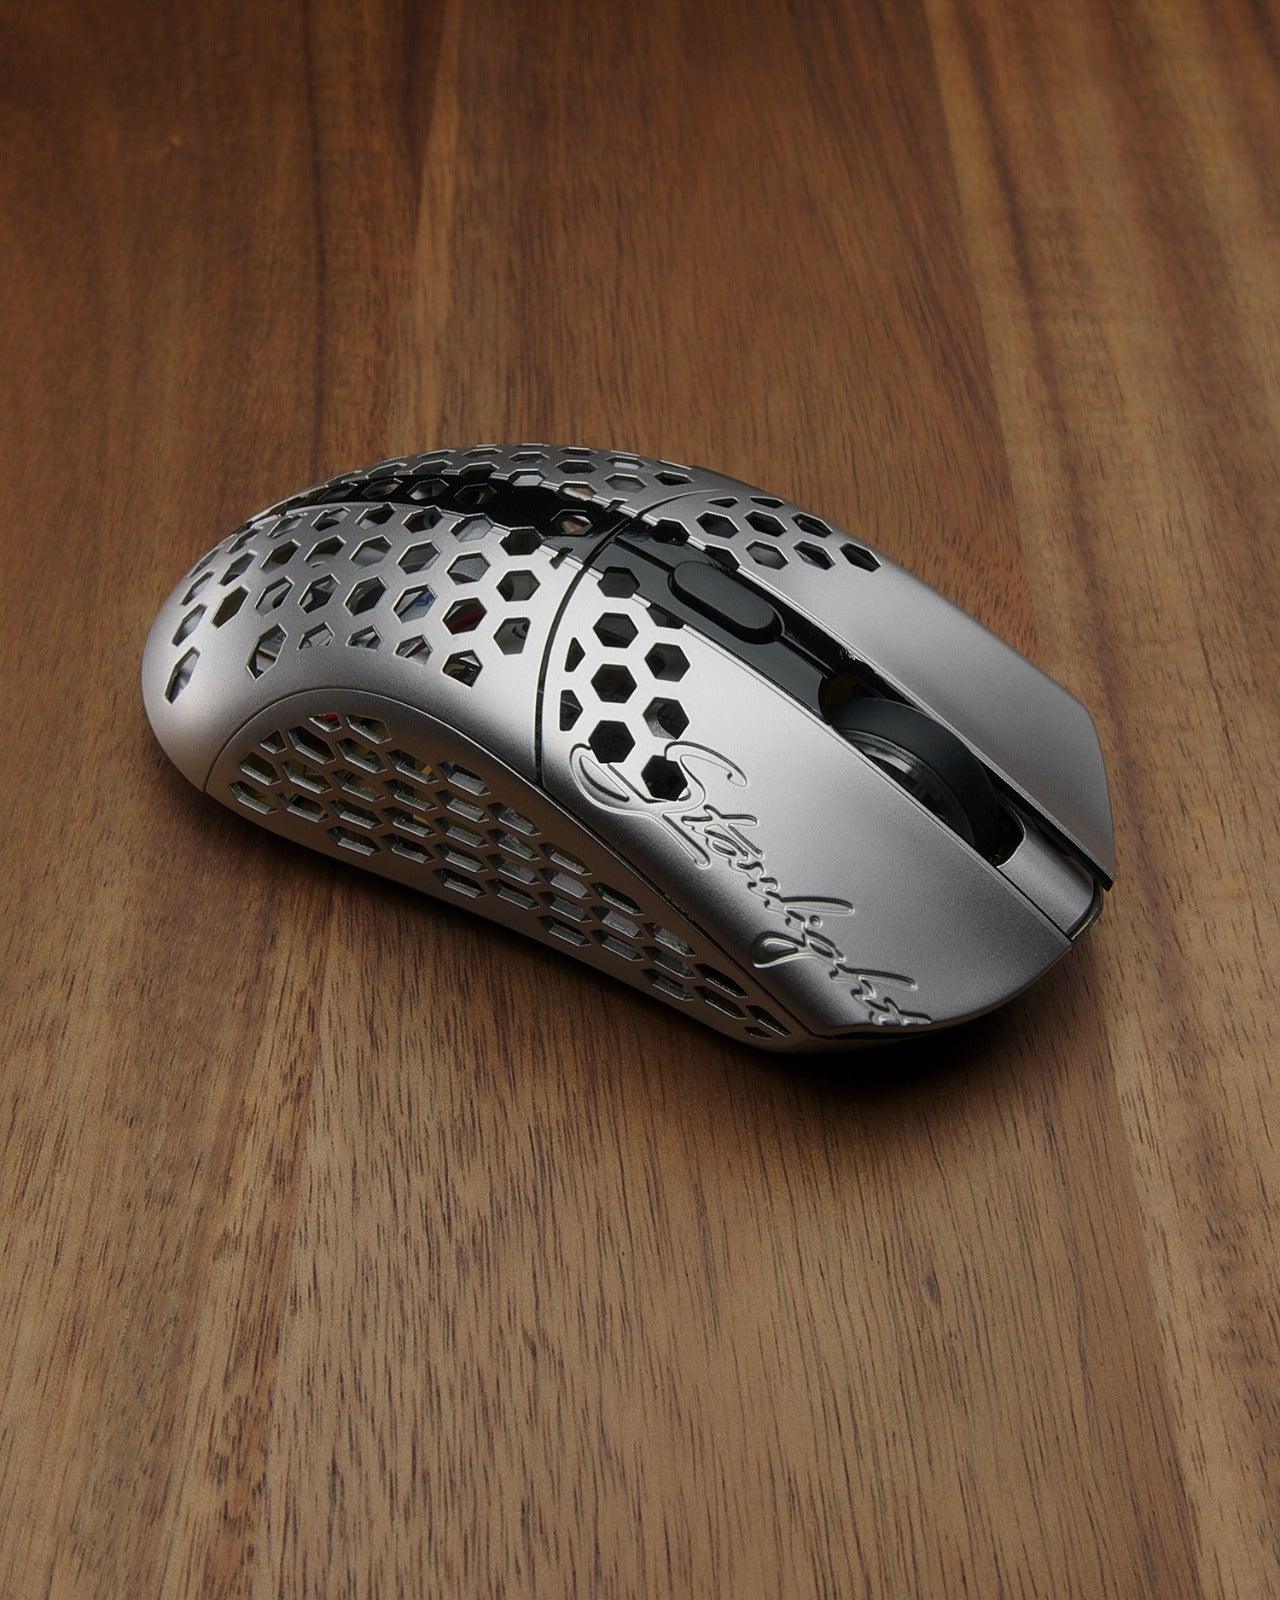 Finalmouse Starlight Pro TenZ Gaming Mouse - Small - Blink.sa.com